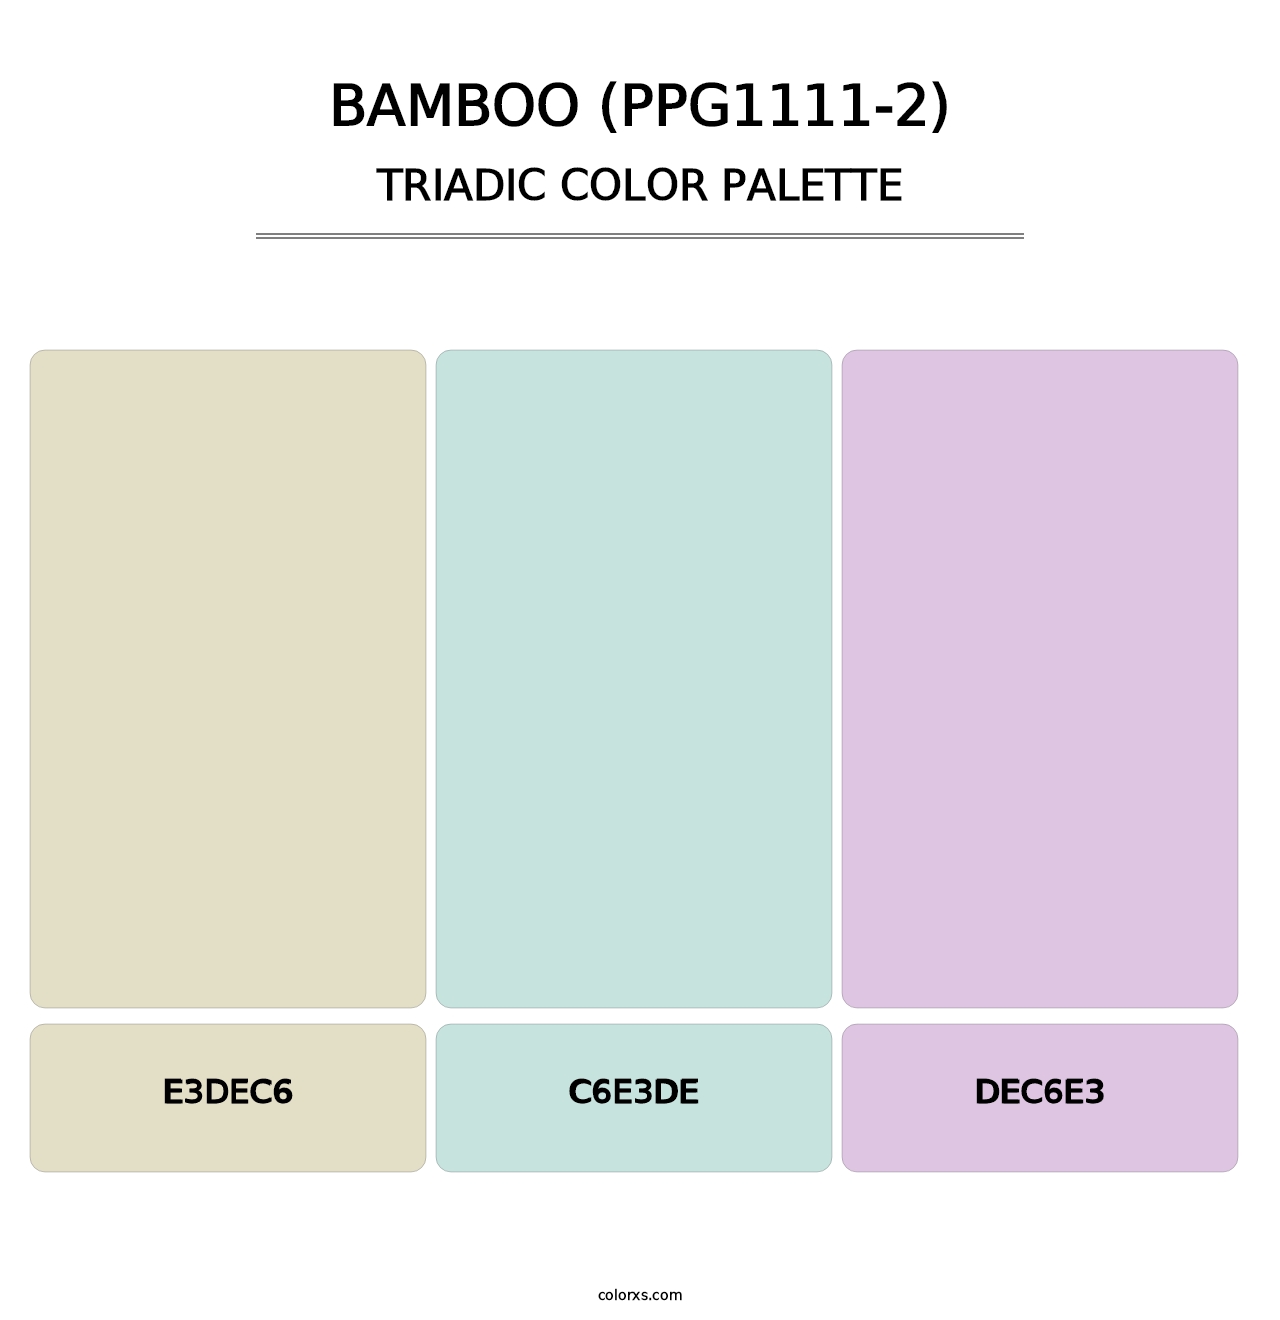 Bamboo (PPG1111-2) - Triadic Color Palette